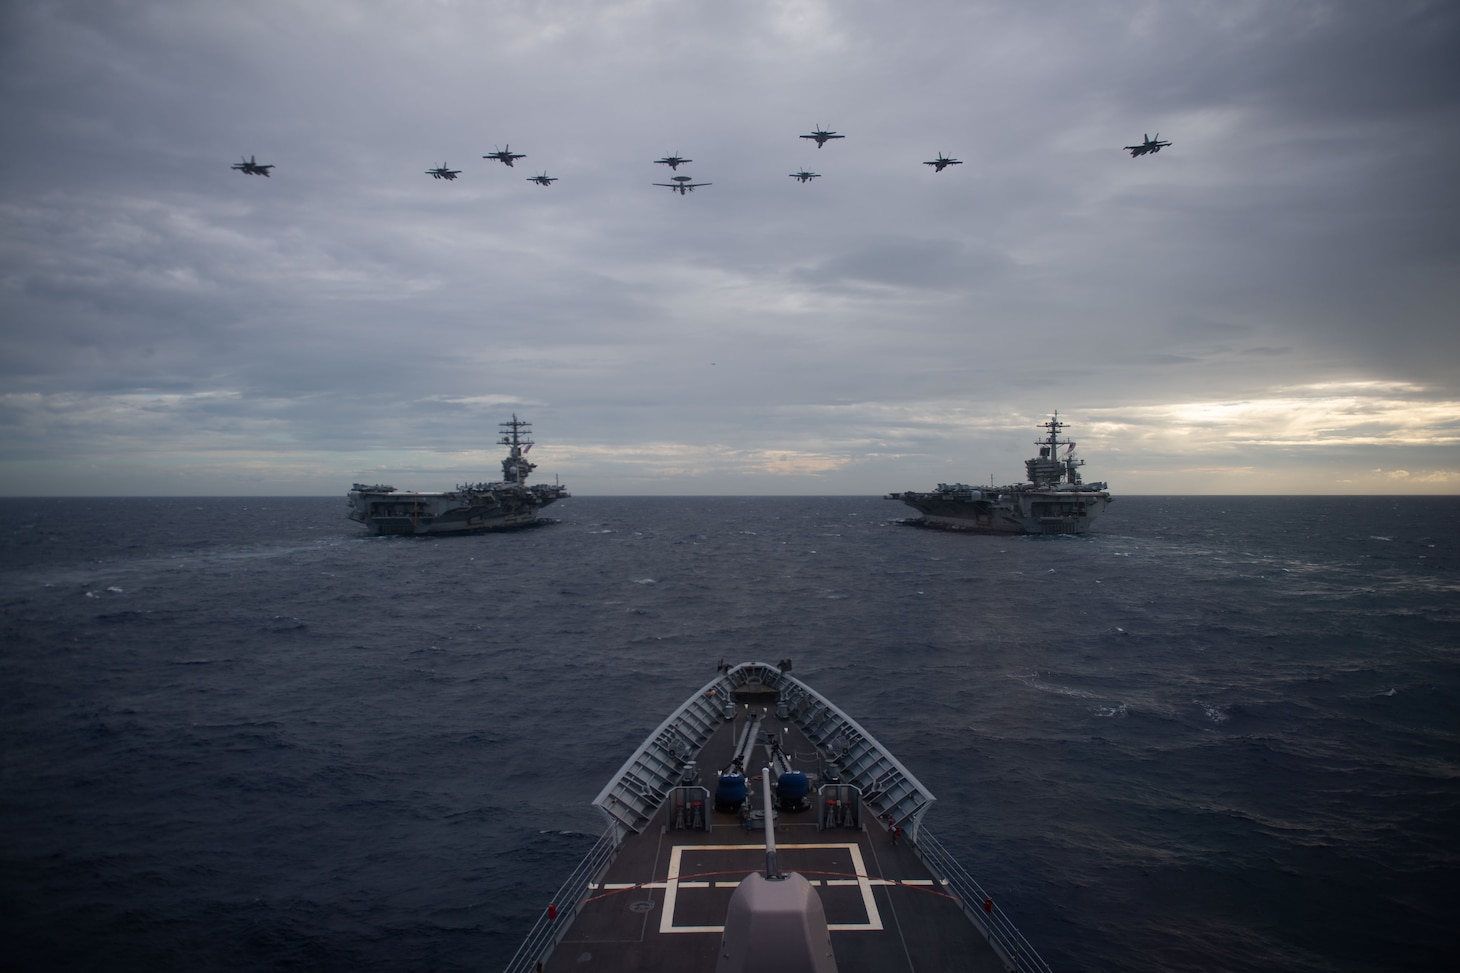 Aircraft from Carrier Air Wings (CVW) 17 and 11 fly in formation above the aircraft carriers USS Nimitz (CVN 68), left, and USS Theodore Roosevelt (CVN 71) during dual carrier operations as seen from the guided-missile cruiser USS Princeton (CG 59). The Nimitz and Theodore Roosevelt Carrier Strike Groups are conducting dual carrier operations in the Indo-Pacific in support of maritime security operations and theater security cooperation efforts.